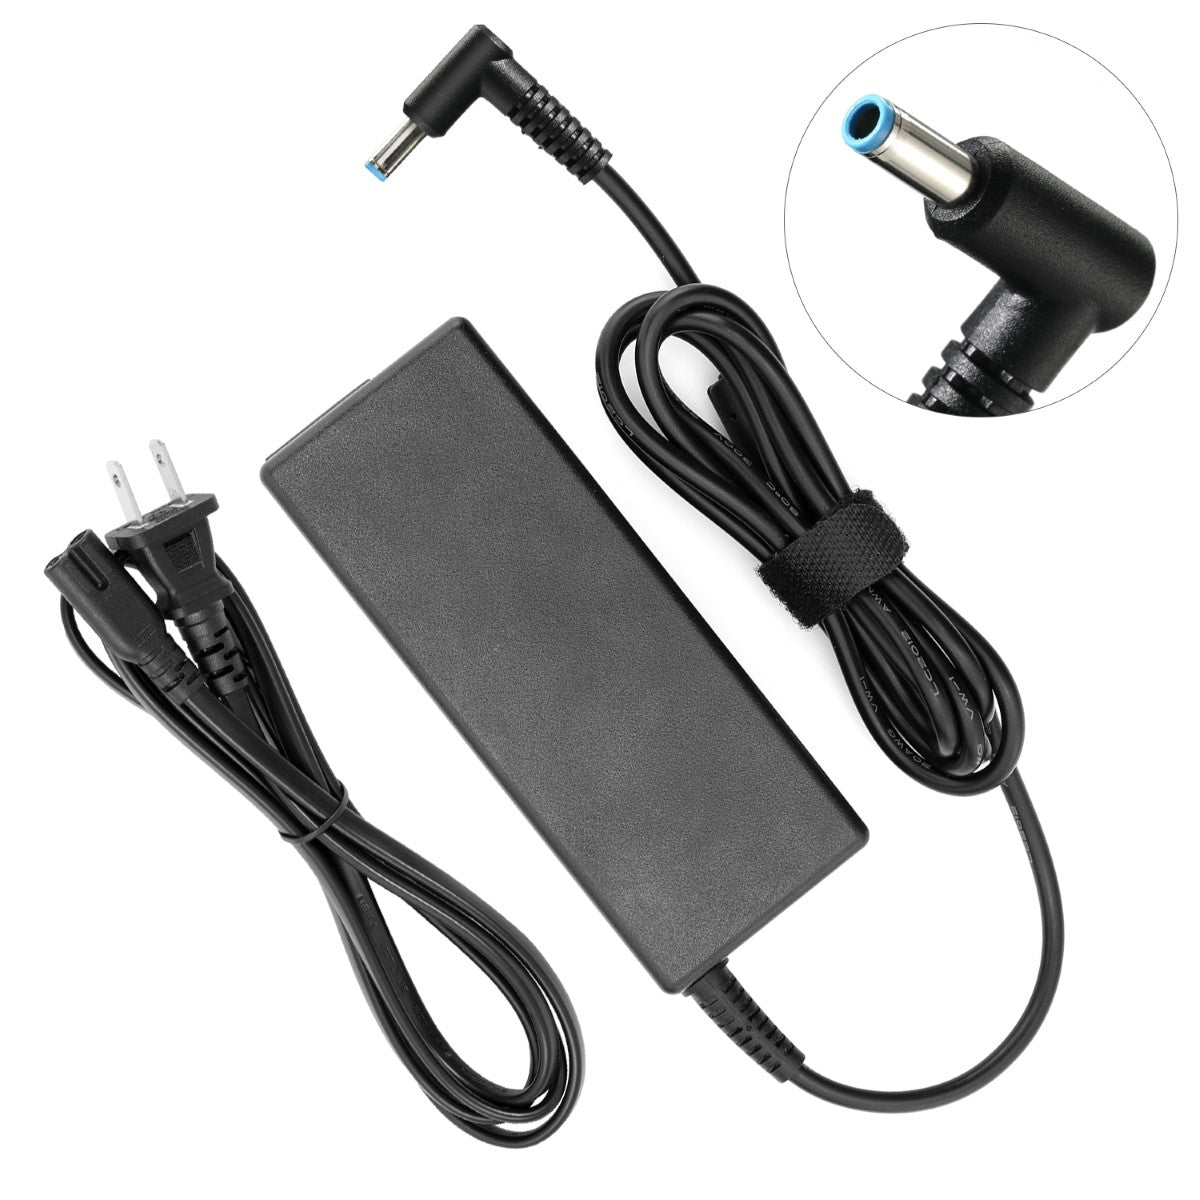 AC Adapter Charger for HP Pavilion Touchsmart 17-f021ds Notebook.